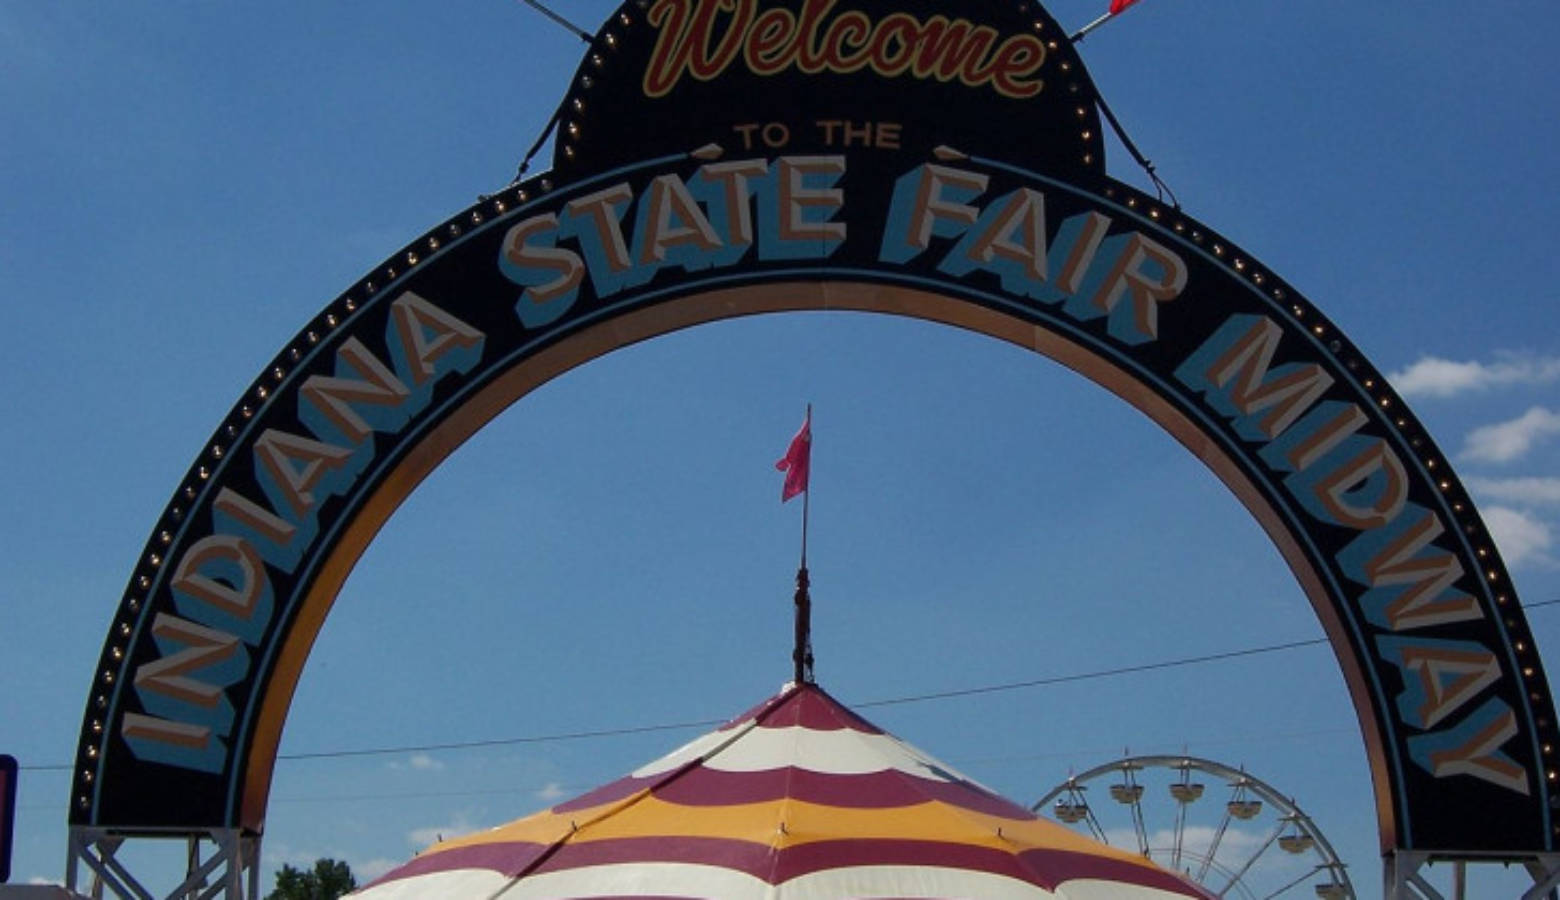 The Indiana State Fair runs from August 2nd to August 18th.